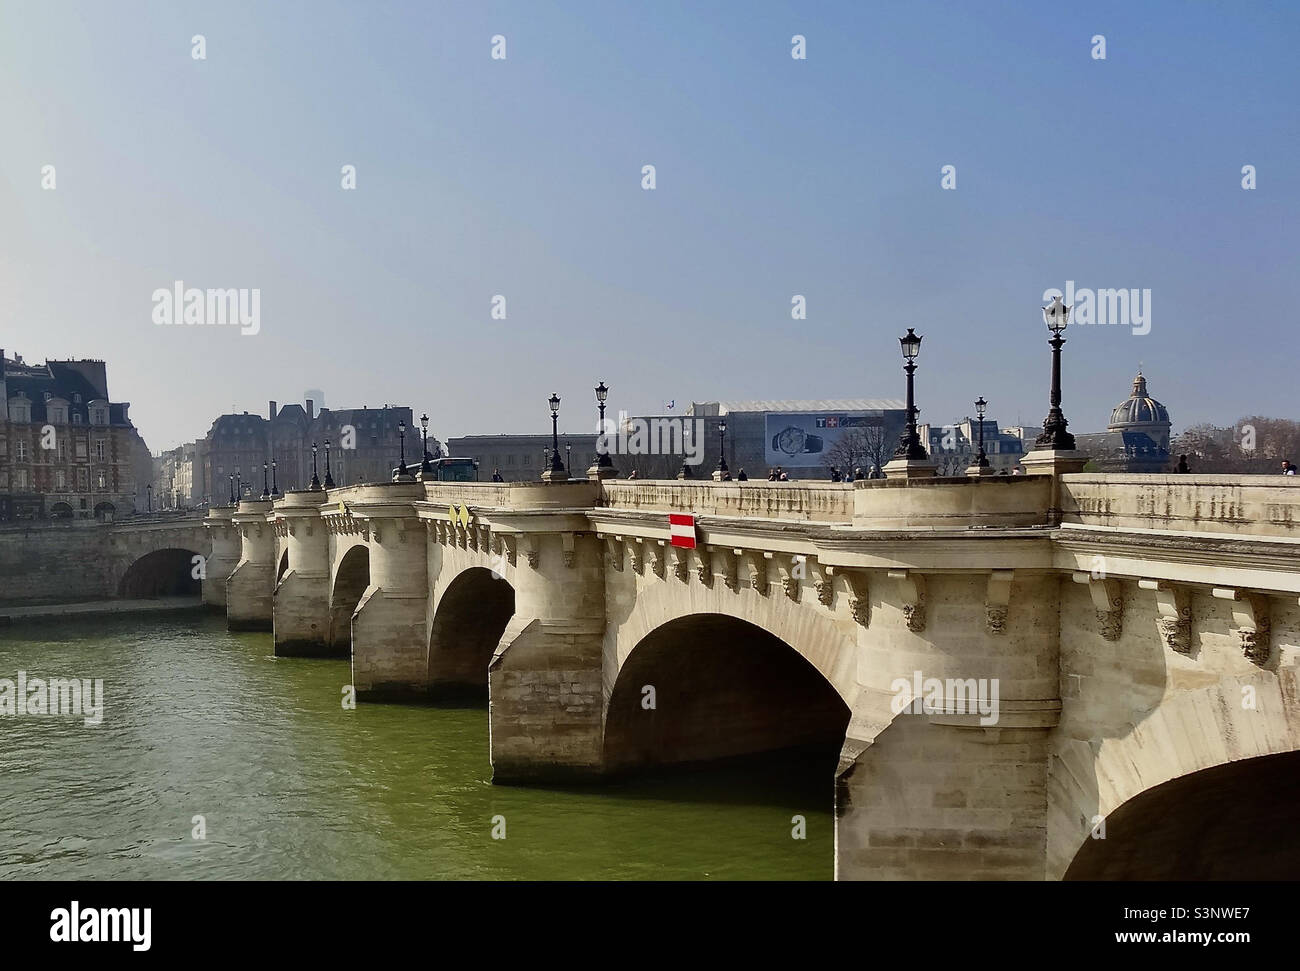 The Pont Neuf (New Bridge: 1578-1607) over the River Seine in Paris, the oldest city bridge and linking the Right and Left Banks. It has undergone much repair and rebuilding over time. Stock Photo